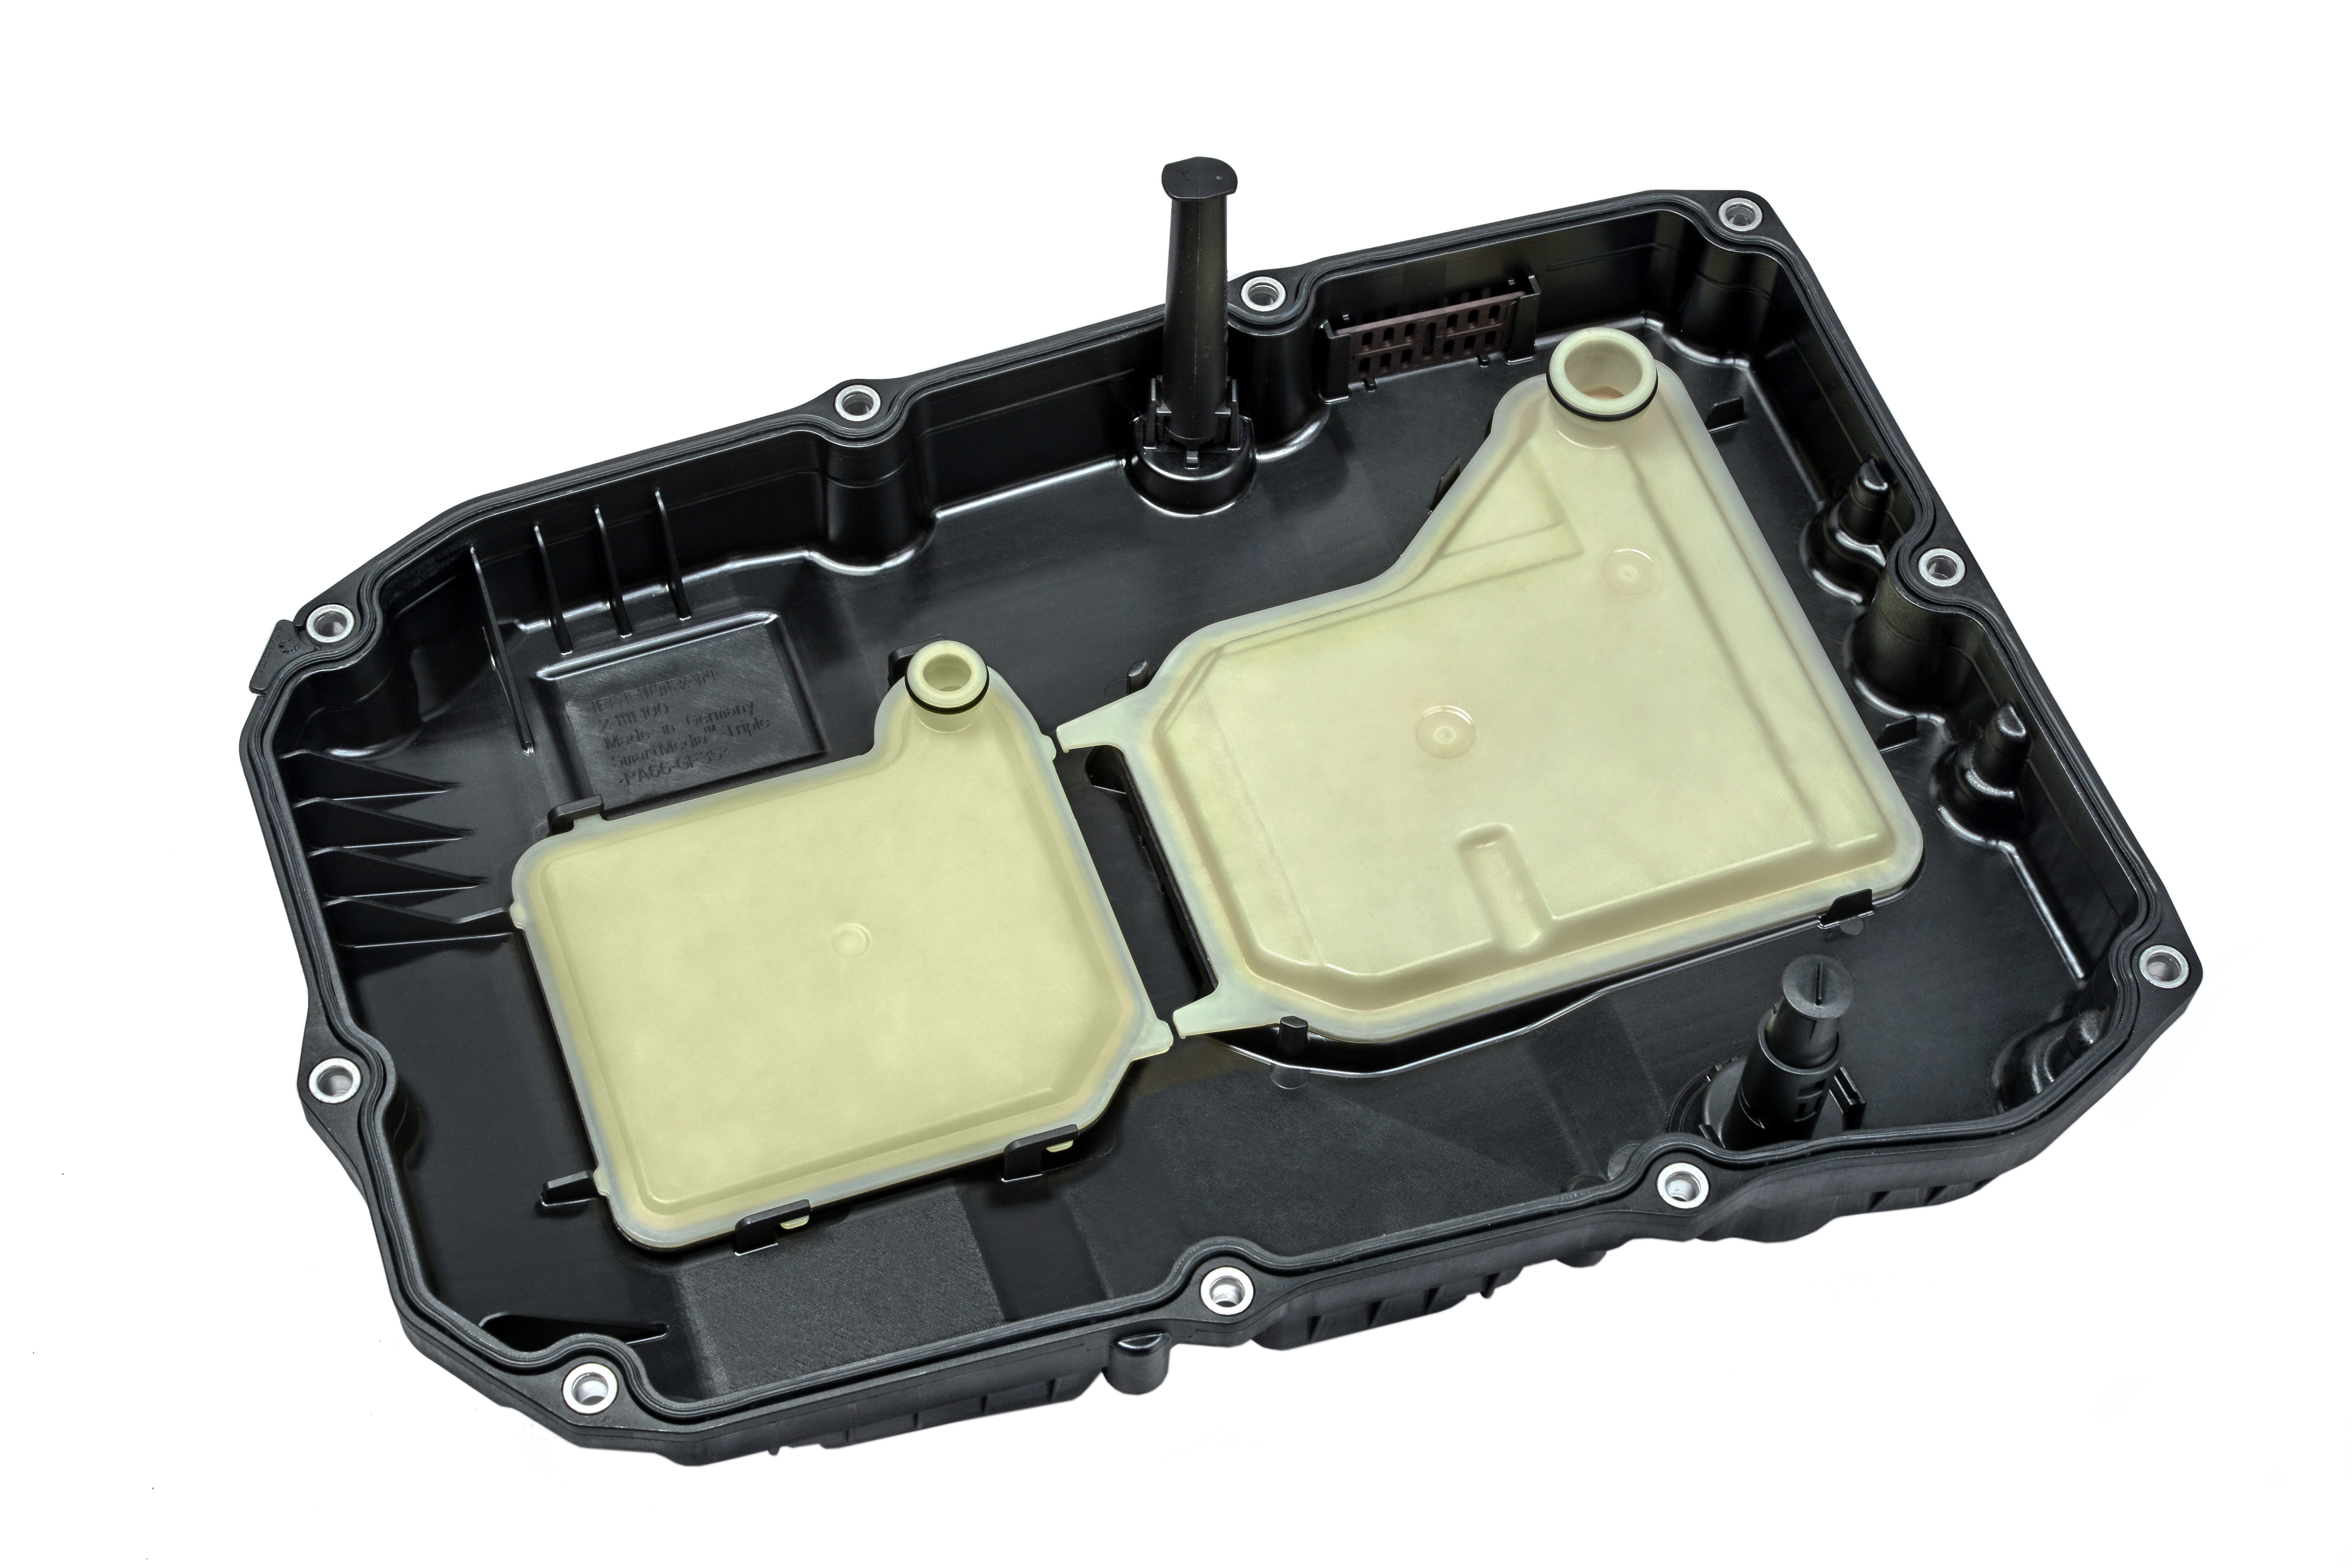 DuPont Performance Materials (DPM) and IBS Filtran demonstrate a new production-ready oil pan made of a high grade glass-fiber-reinforced material which is being used in Daimler’s state of the art nine-speed automatic transmission.